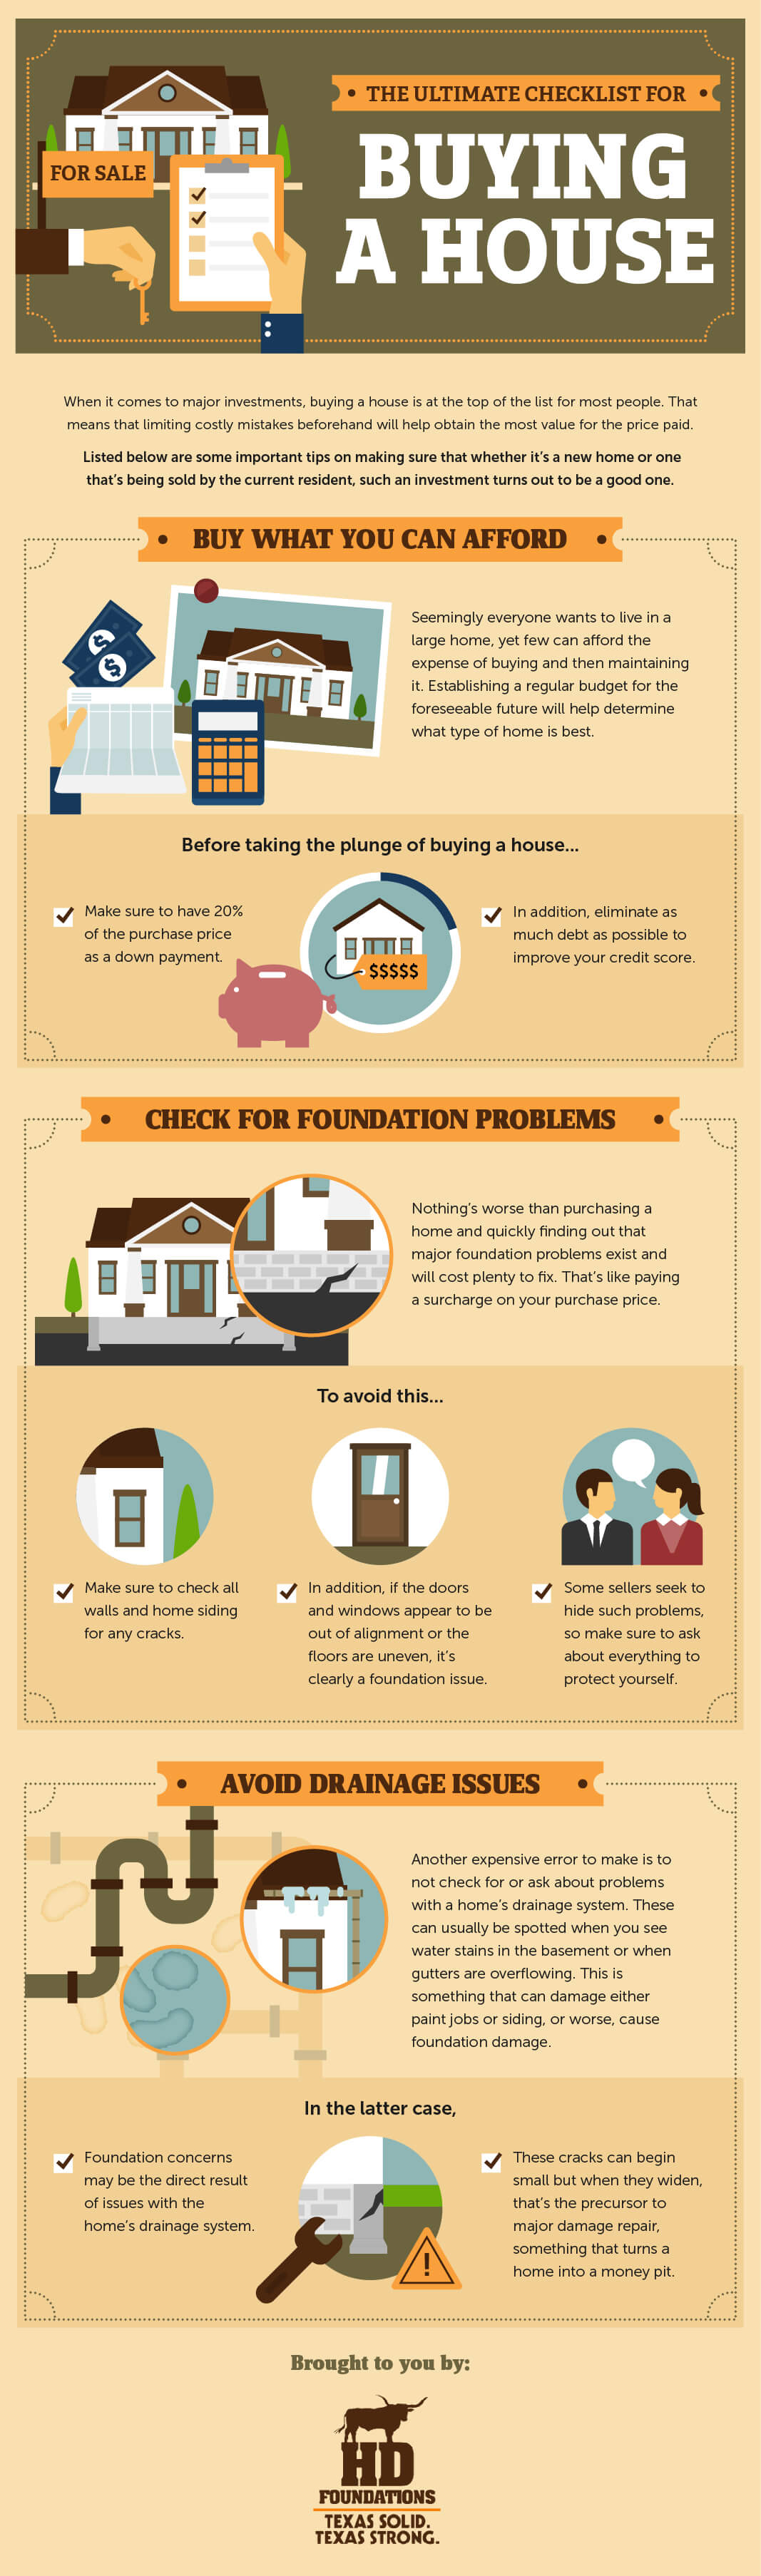 the-ultimate-checklist-for-buying-a-house-hd-foundations